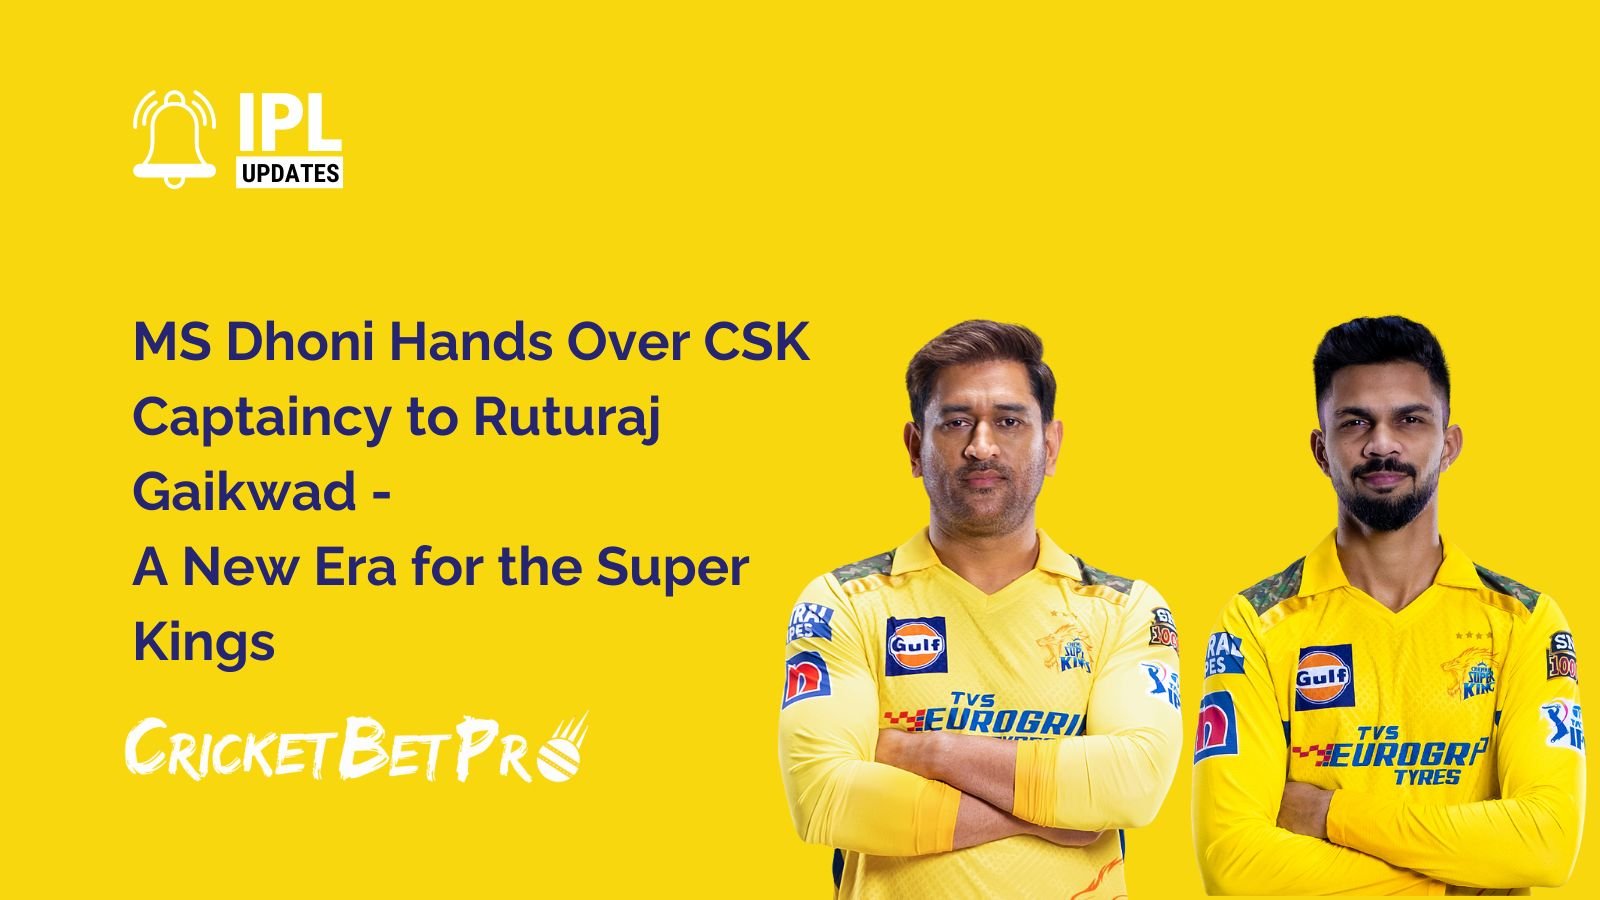 MS Dhoni Hands Over CSK Captaincy to Ruturaj Gaikwad - A New Era for the Super Kings